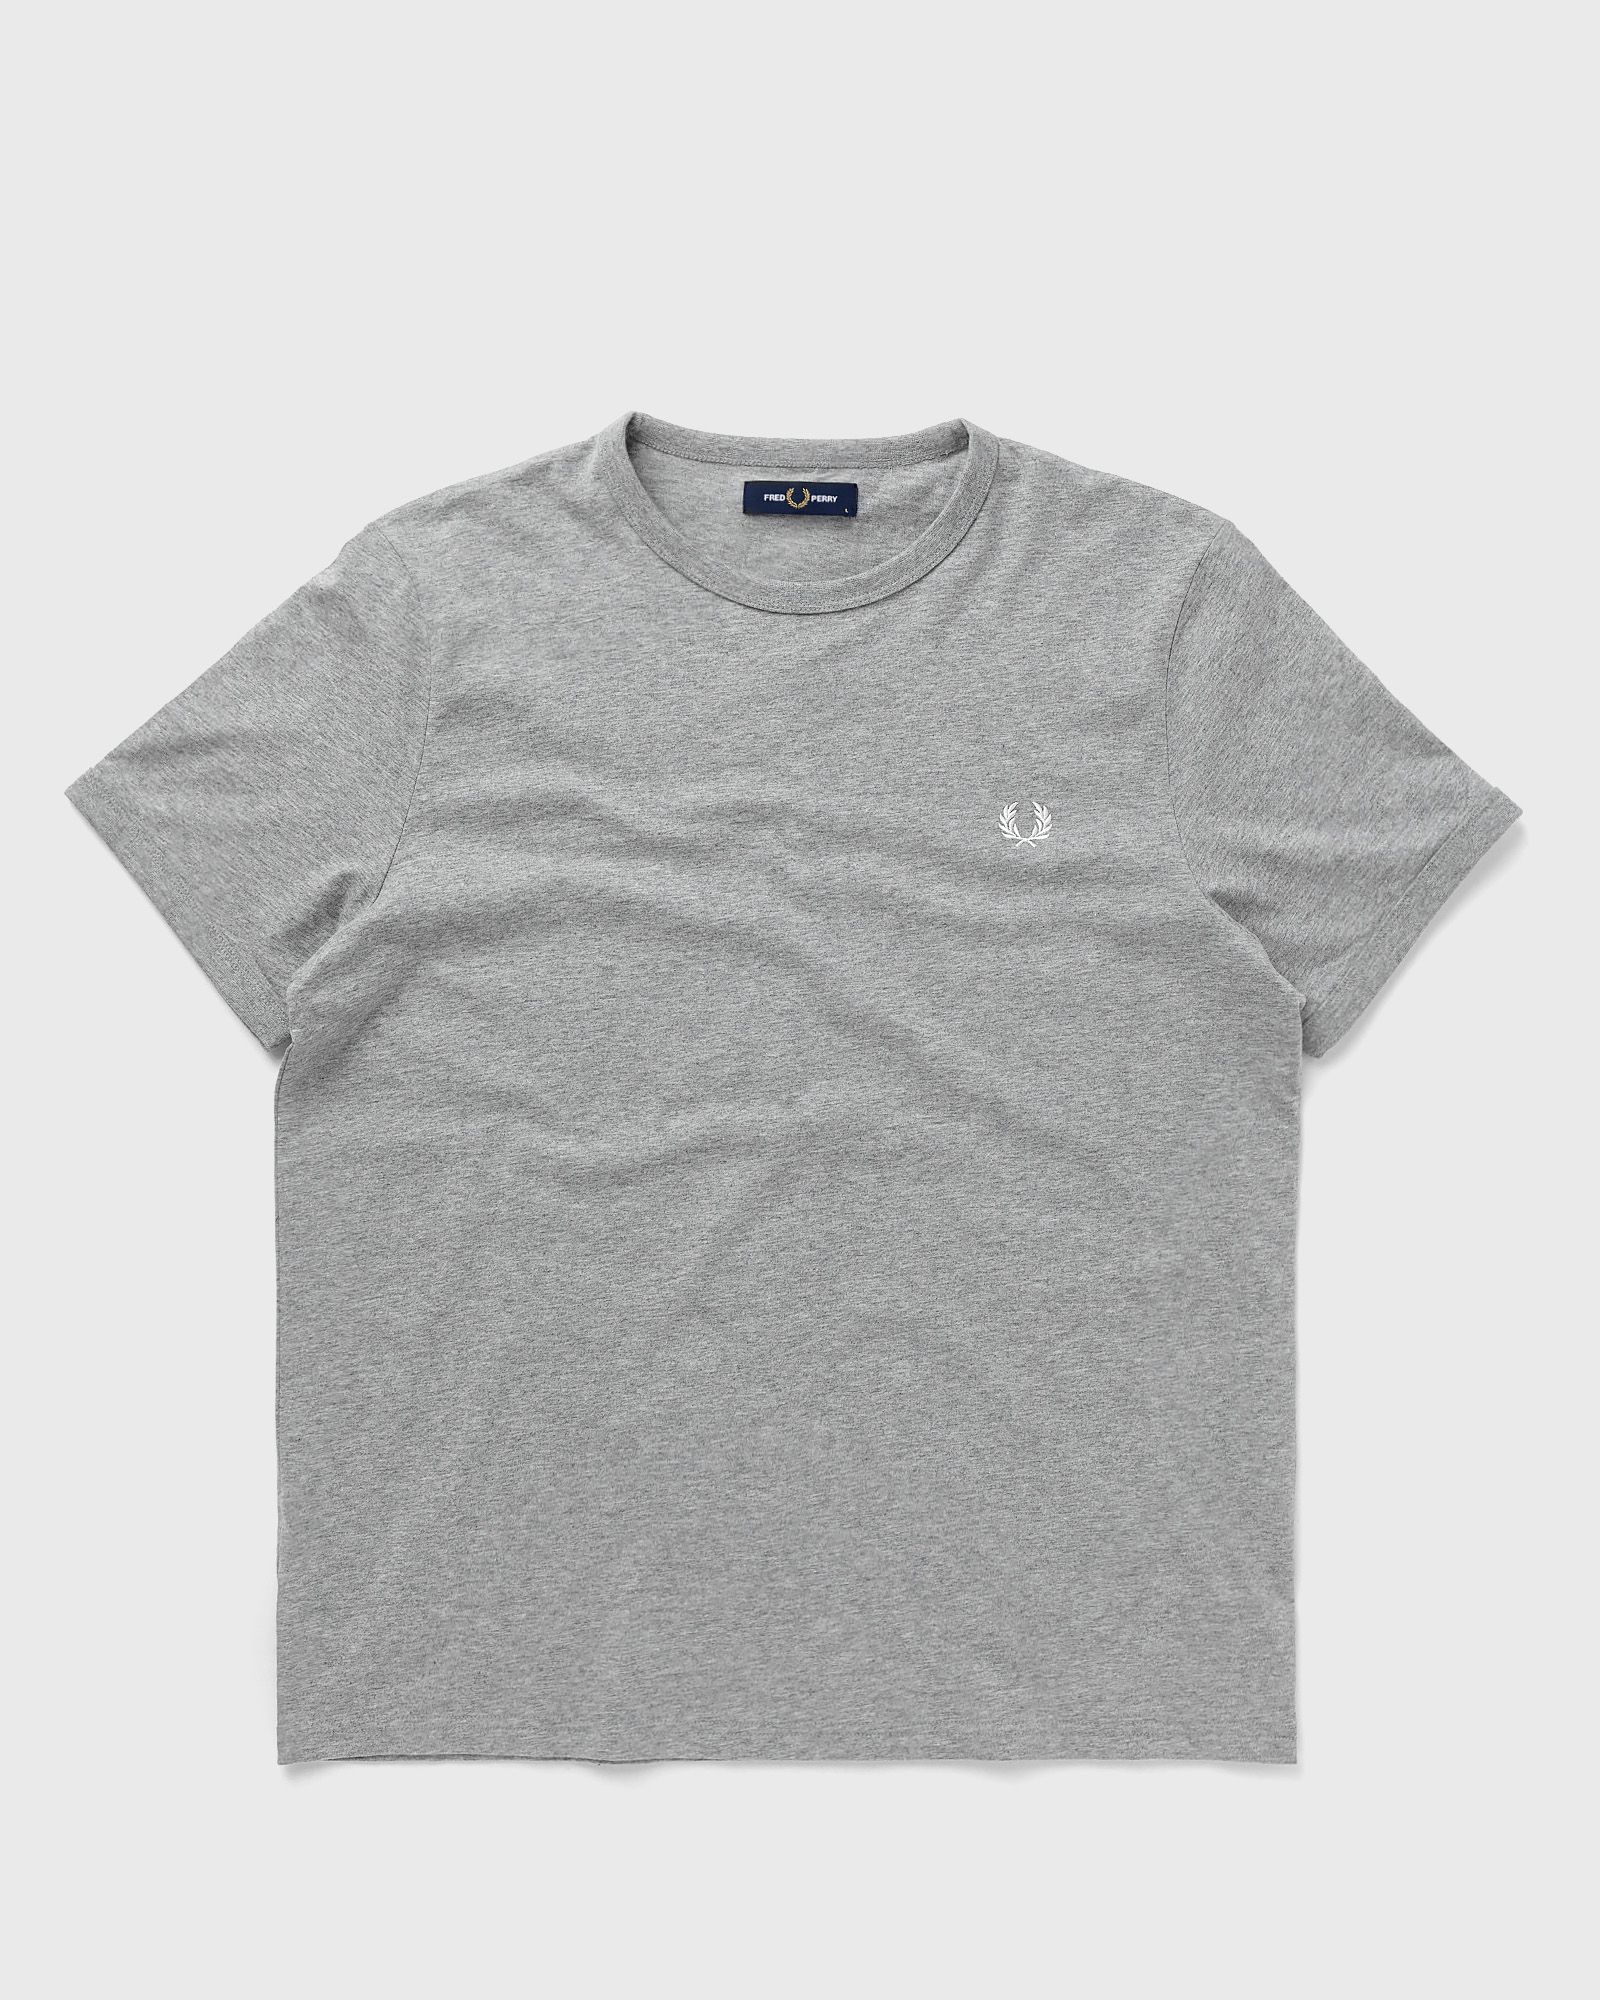 Fred Perry RINGER T-SHIRT men Shortsleeves grey in Größe:L von Fred Perry